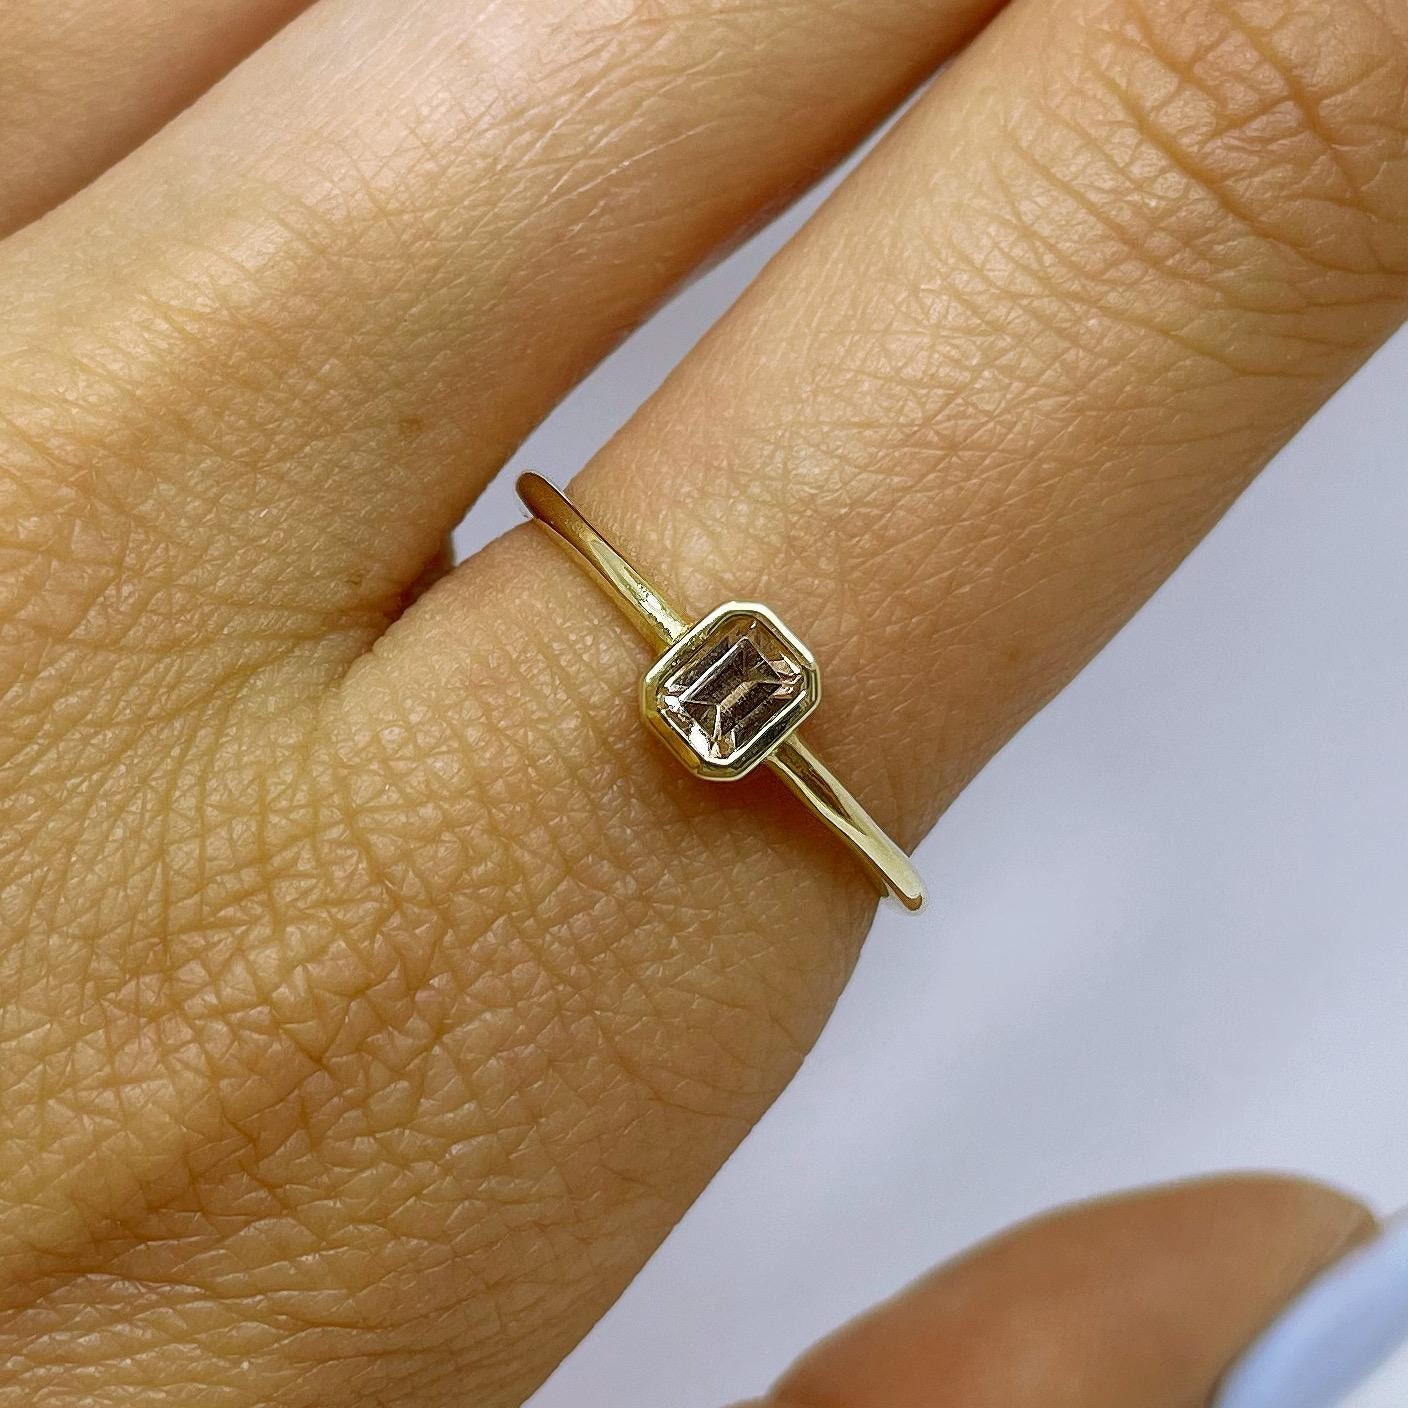 Dainty Peach Topaz Gold Ring, Solitaire Gold Ring, Emerald Cut Topaz Ring,  Peach Gemstone Solid Gold Ring, Anniversary Jewelry Gift - Etsy